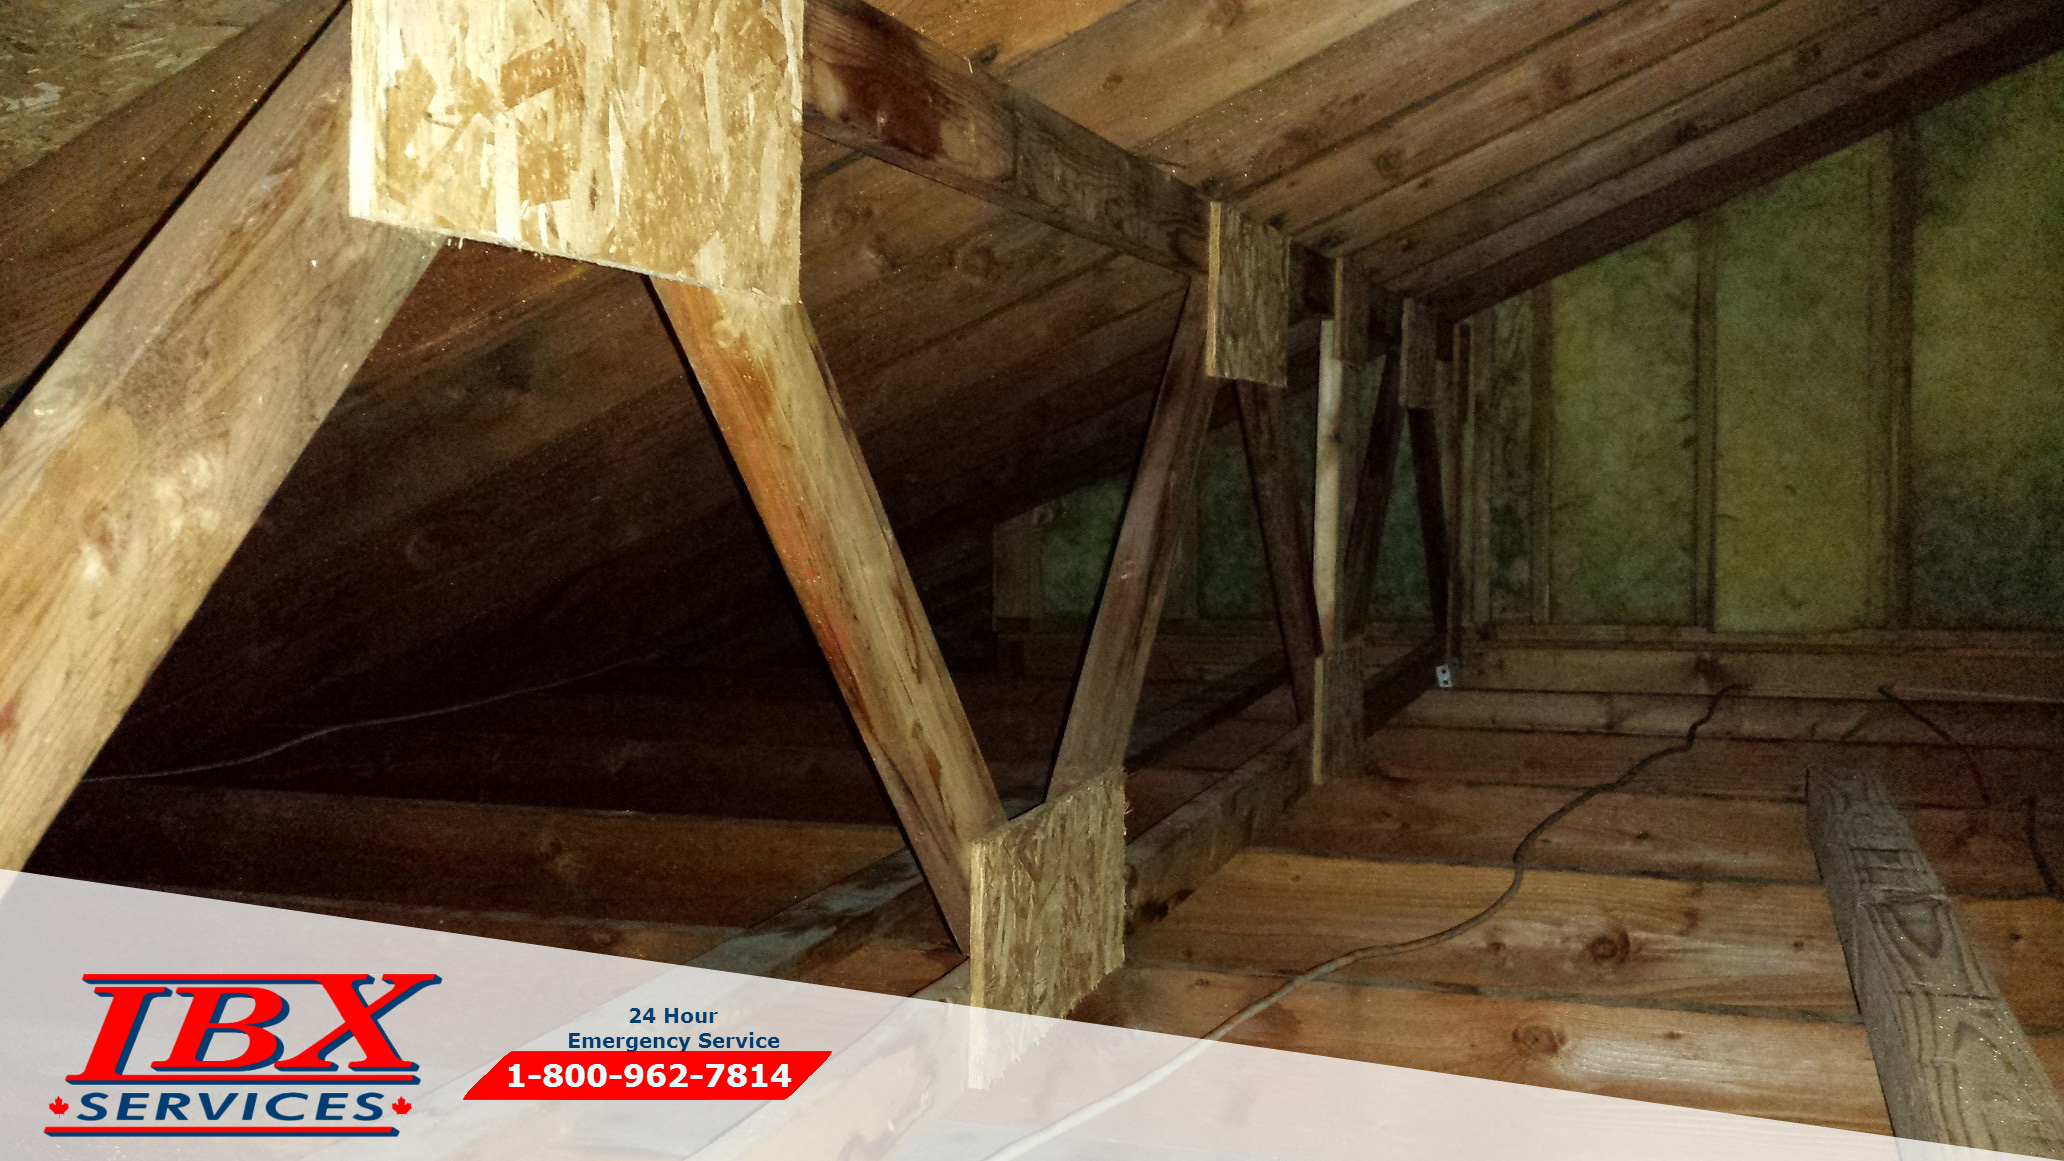 Attic Mold Removal | Choose IBX Services